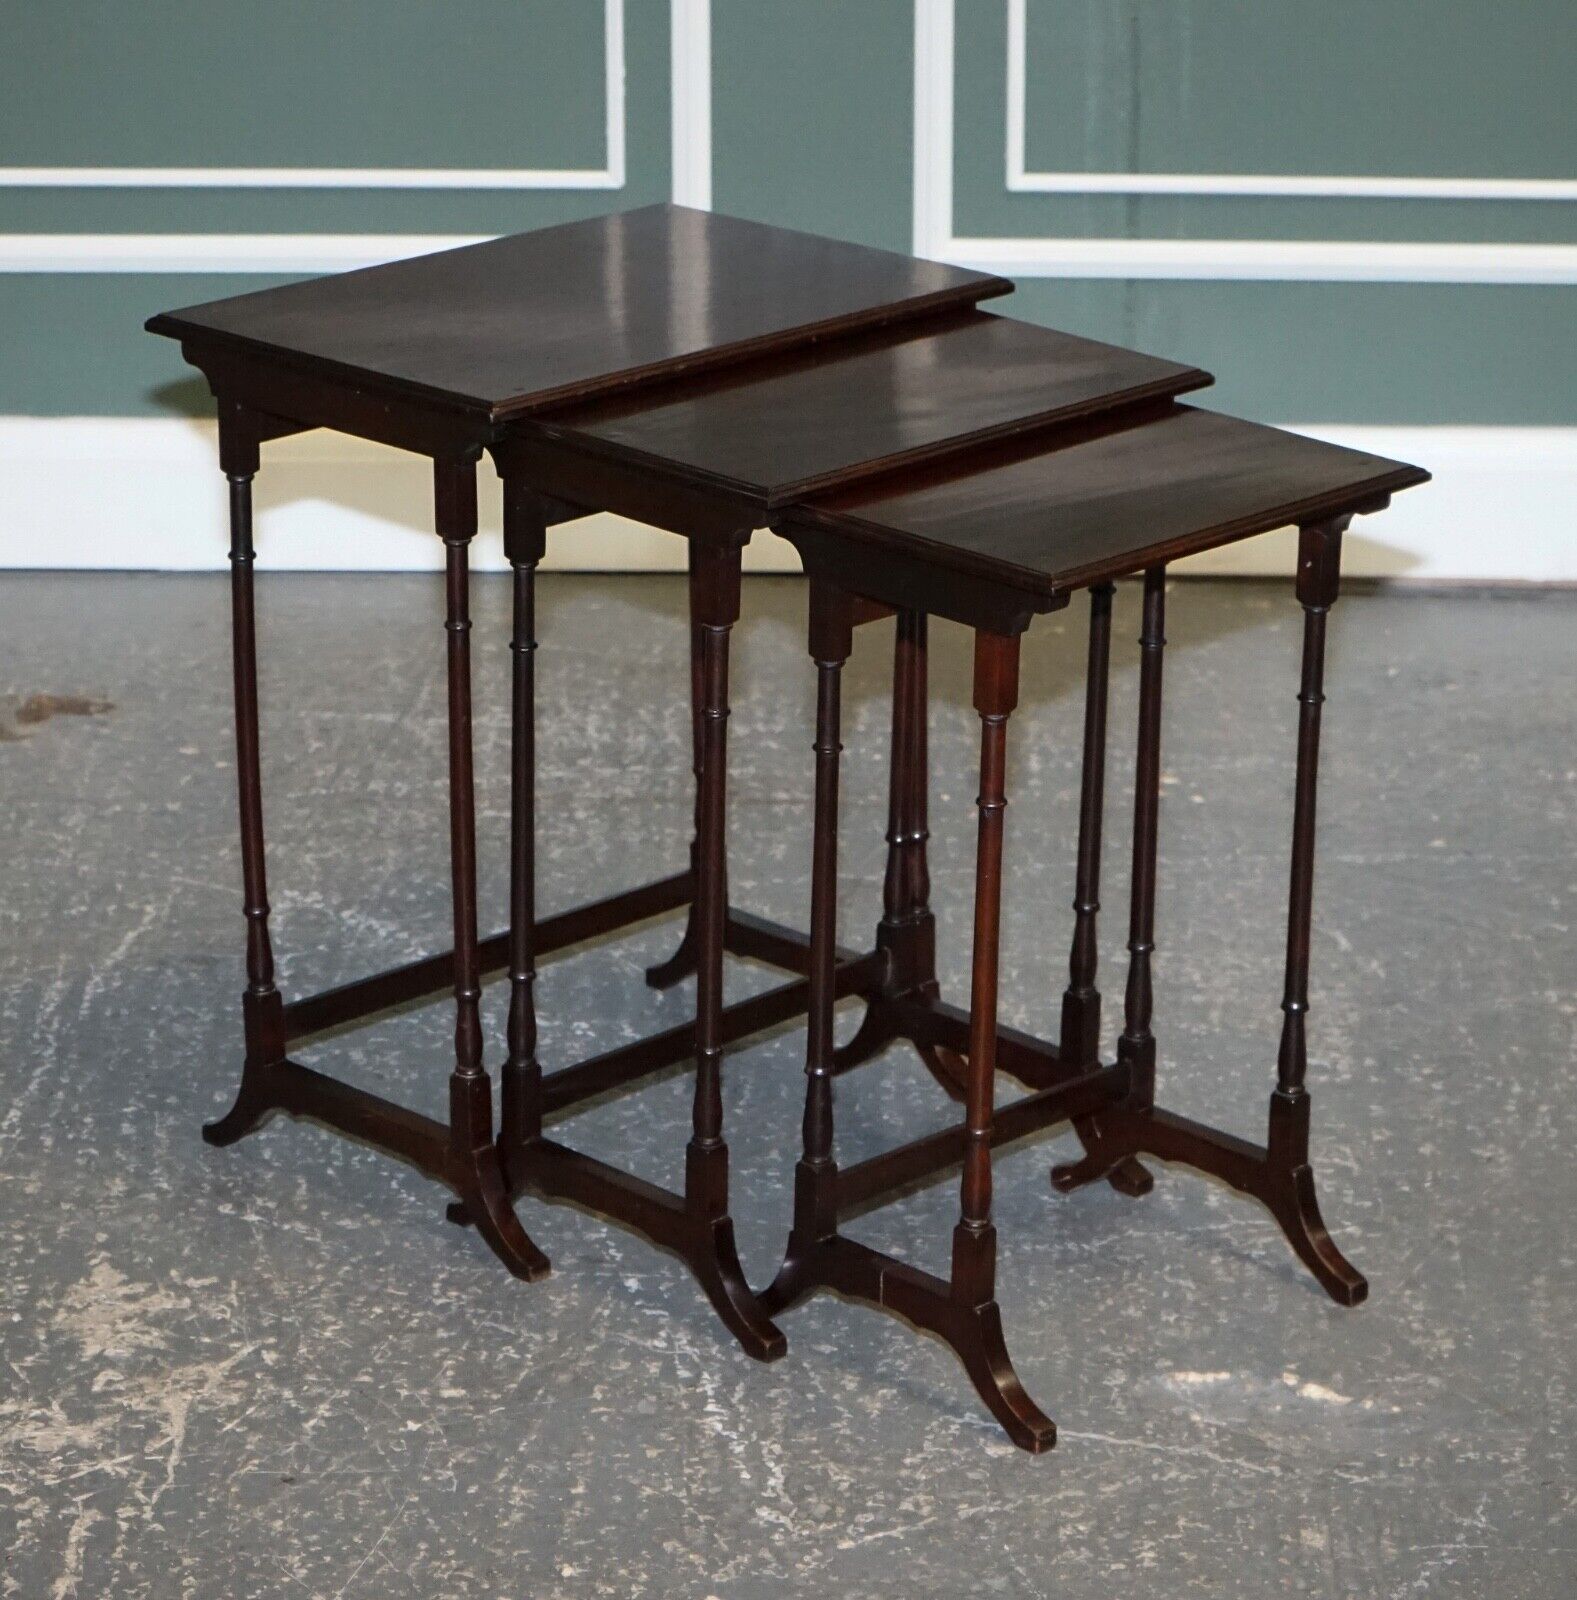 VICTORIAN NEST OF THREE NESTING TABLES SIDE TABLES WITH BAMBOO LEGS